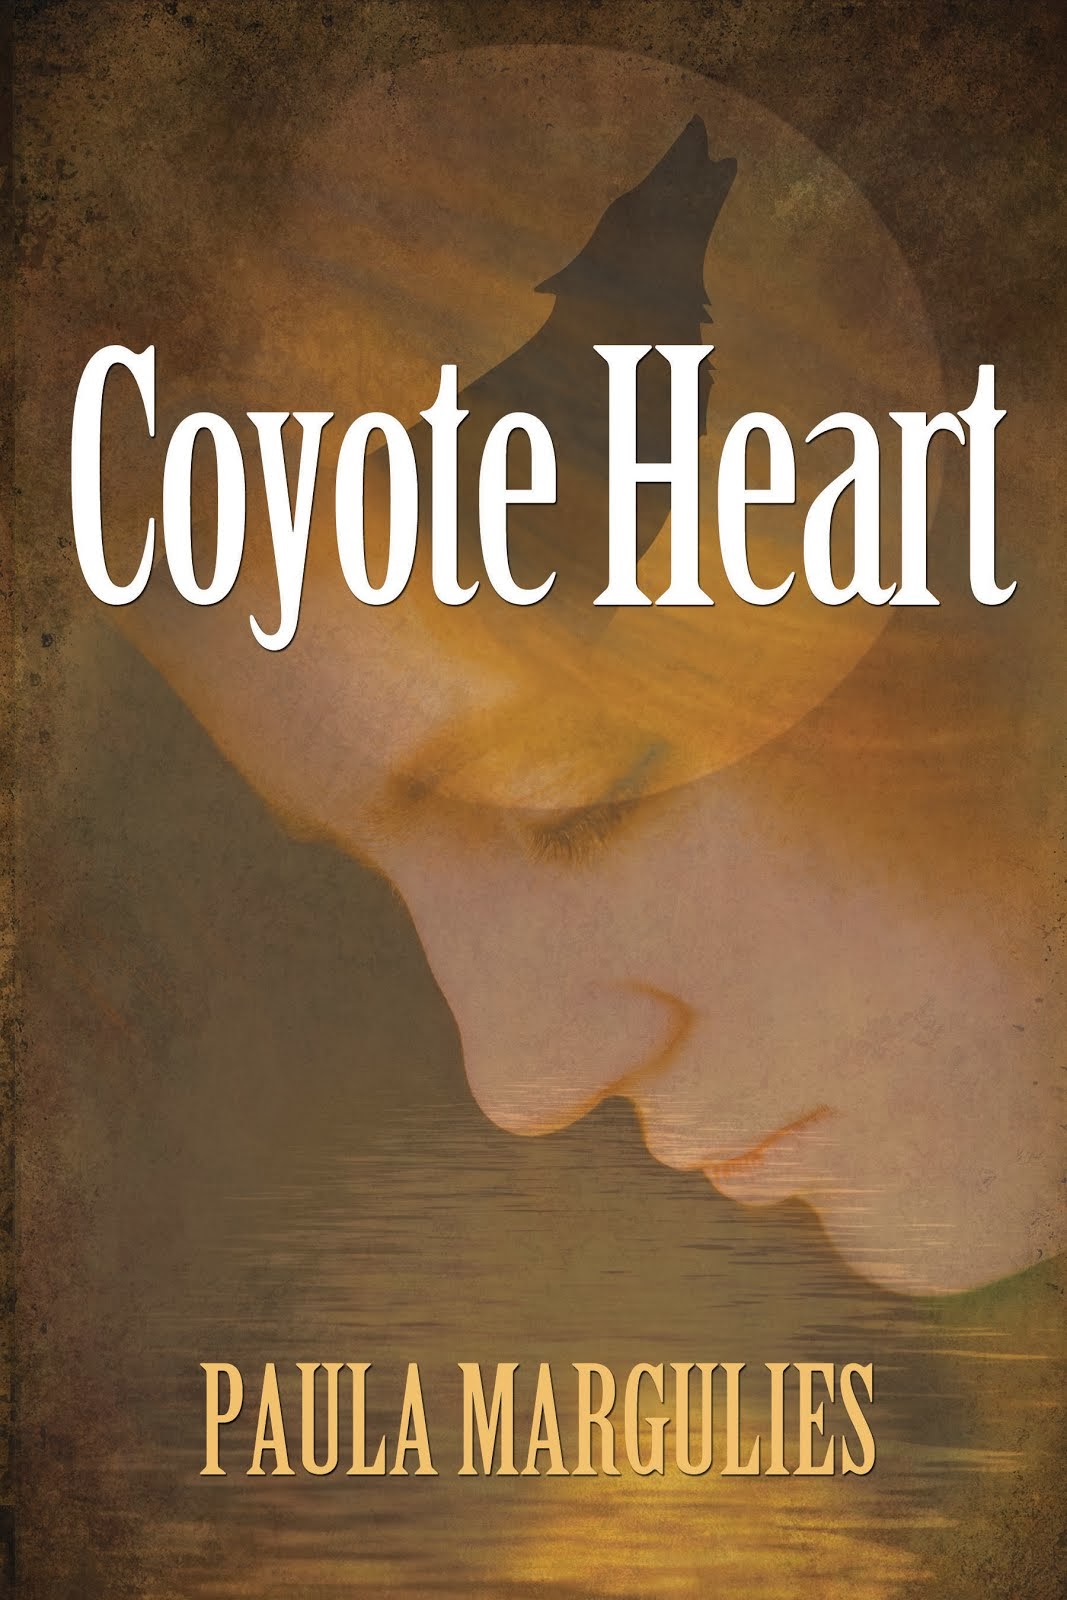 Coyote Heart, Second Edition